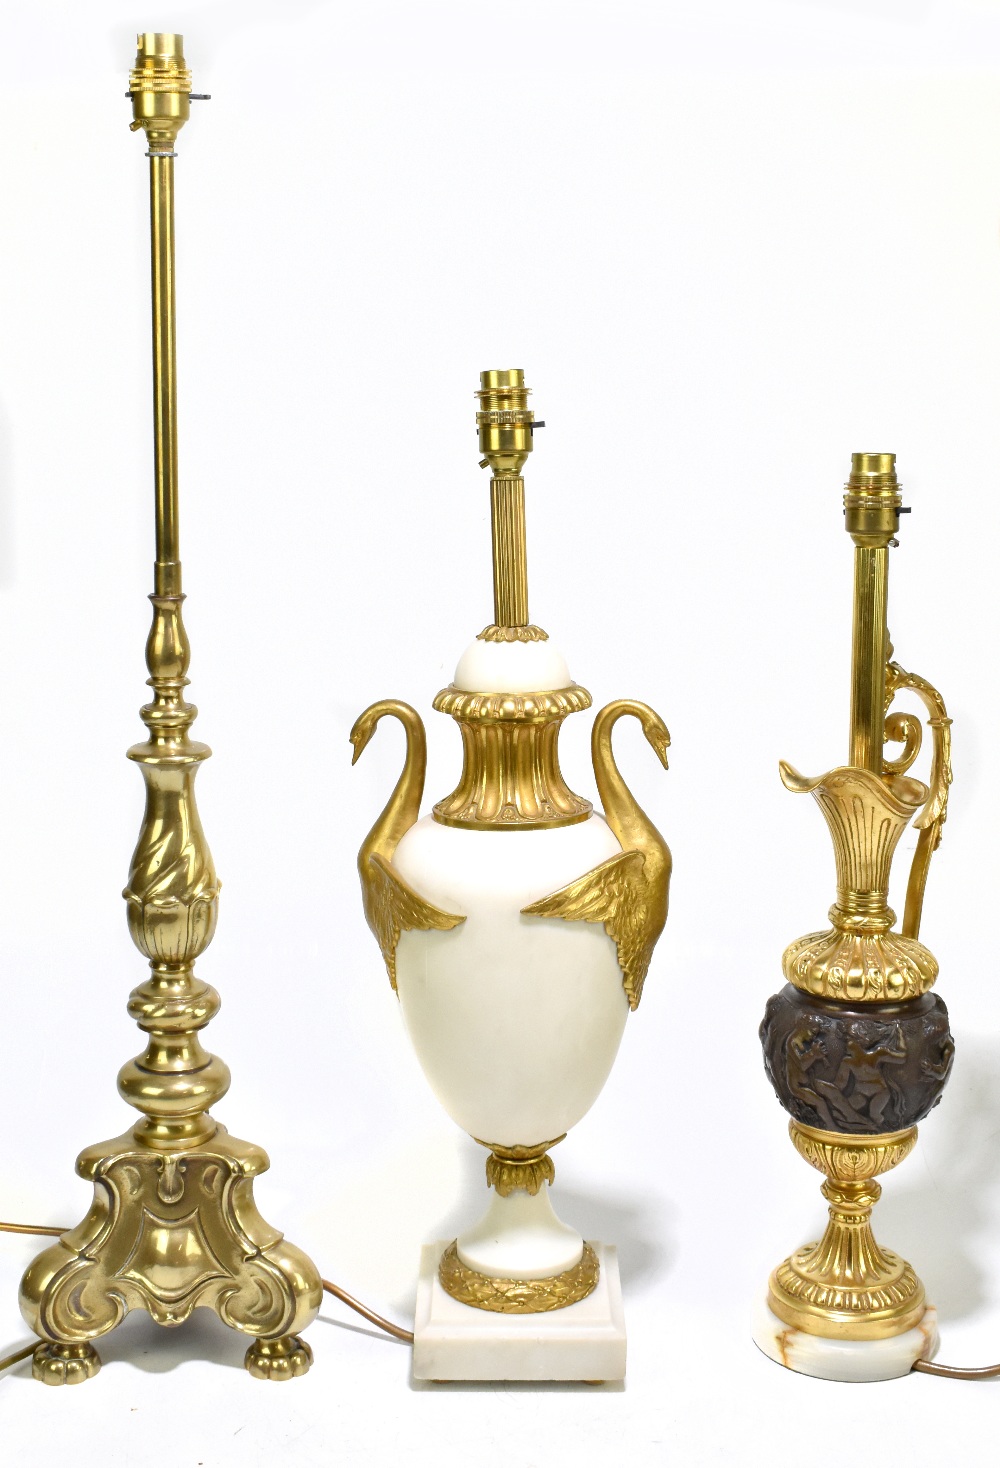 An early 20th century ormolu mounted marble table lamp with mounted handles in the form of swans,